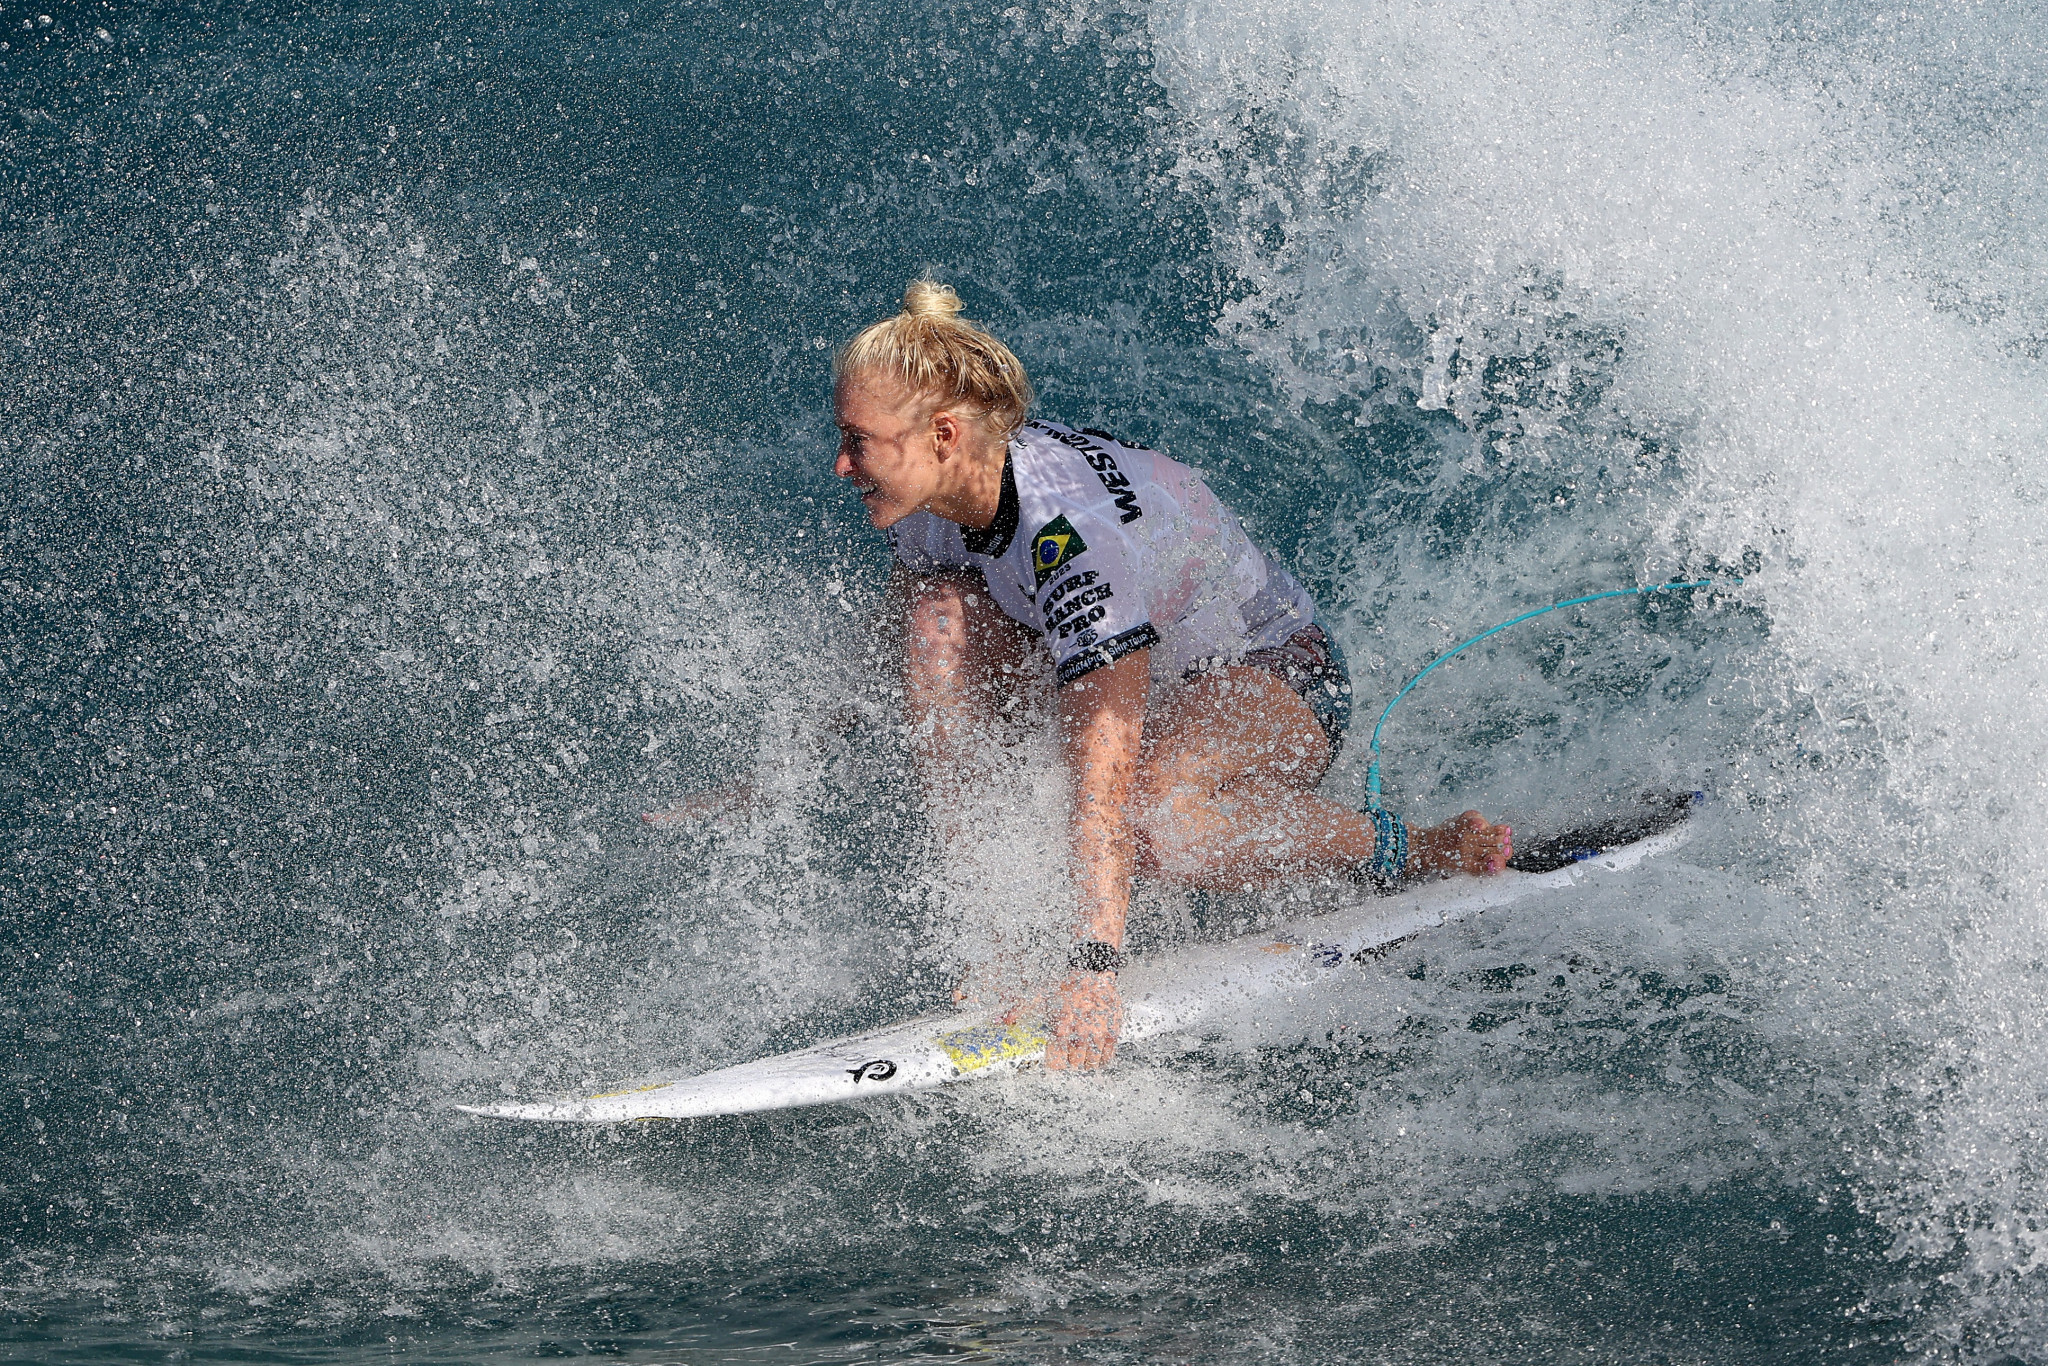 Brazil’s Tatiana Weston-Webb captured the women's title at the World Surfing Games ©Getty Images